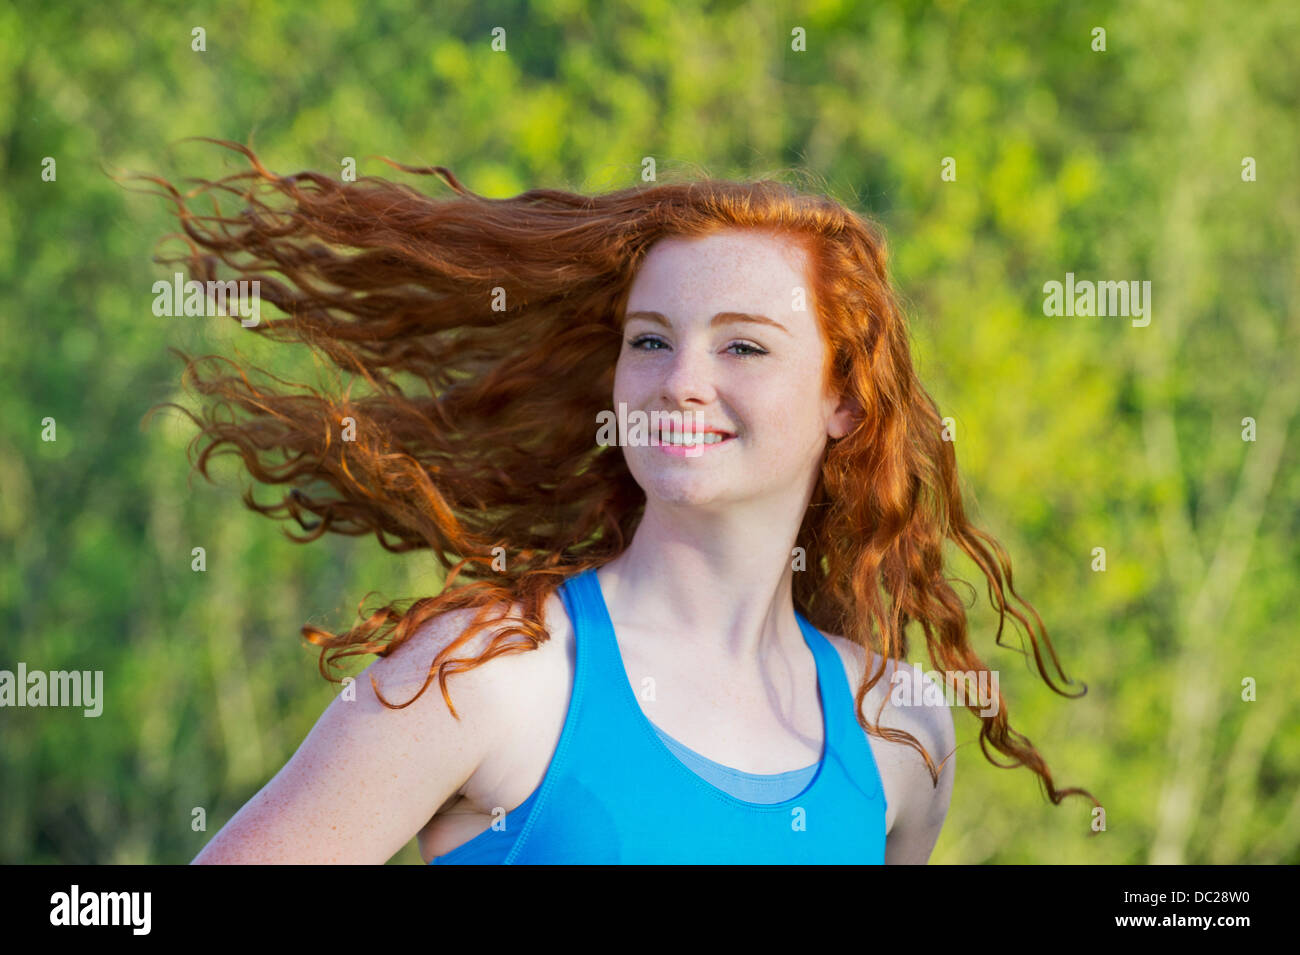 Portrait of teenage girl with long red hair Stock Photo